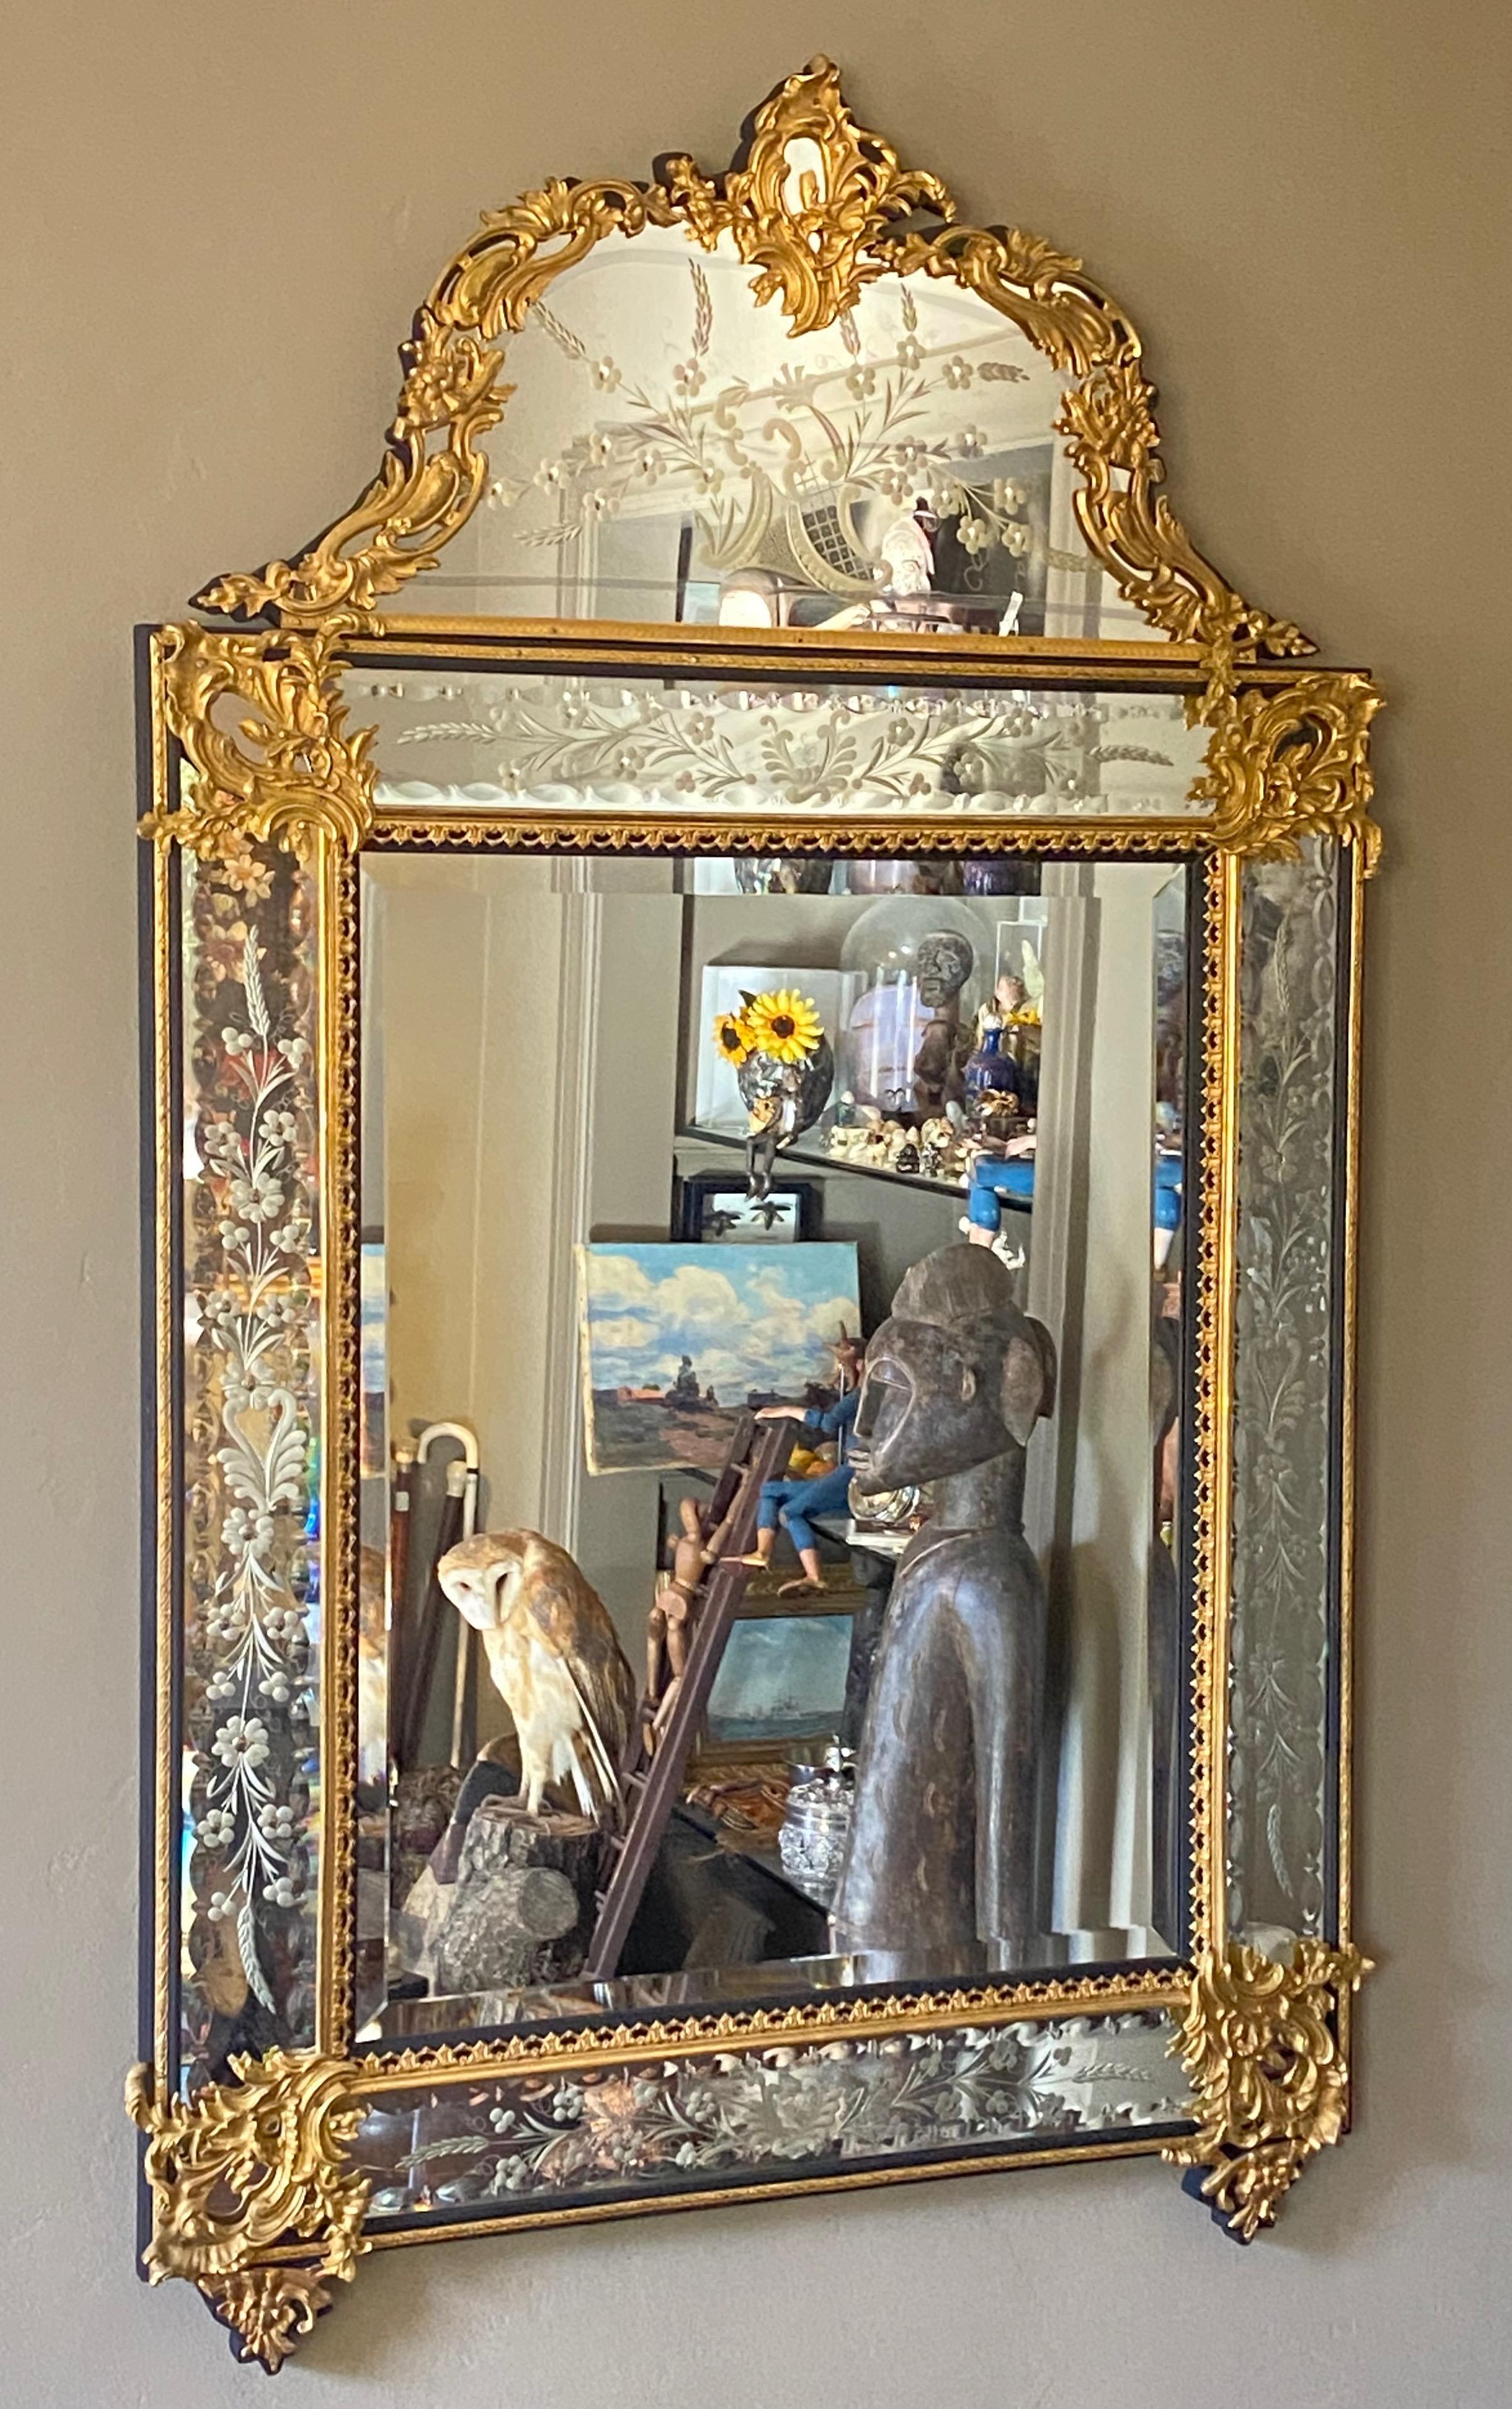 An ornate and beautiful quality beveled and etched glass mirror with cast brass overlay decoration.
In excellent original condition.
Mirror shows some light minor clouding in areas around the top pediment section.
France, early to mid-20th